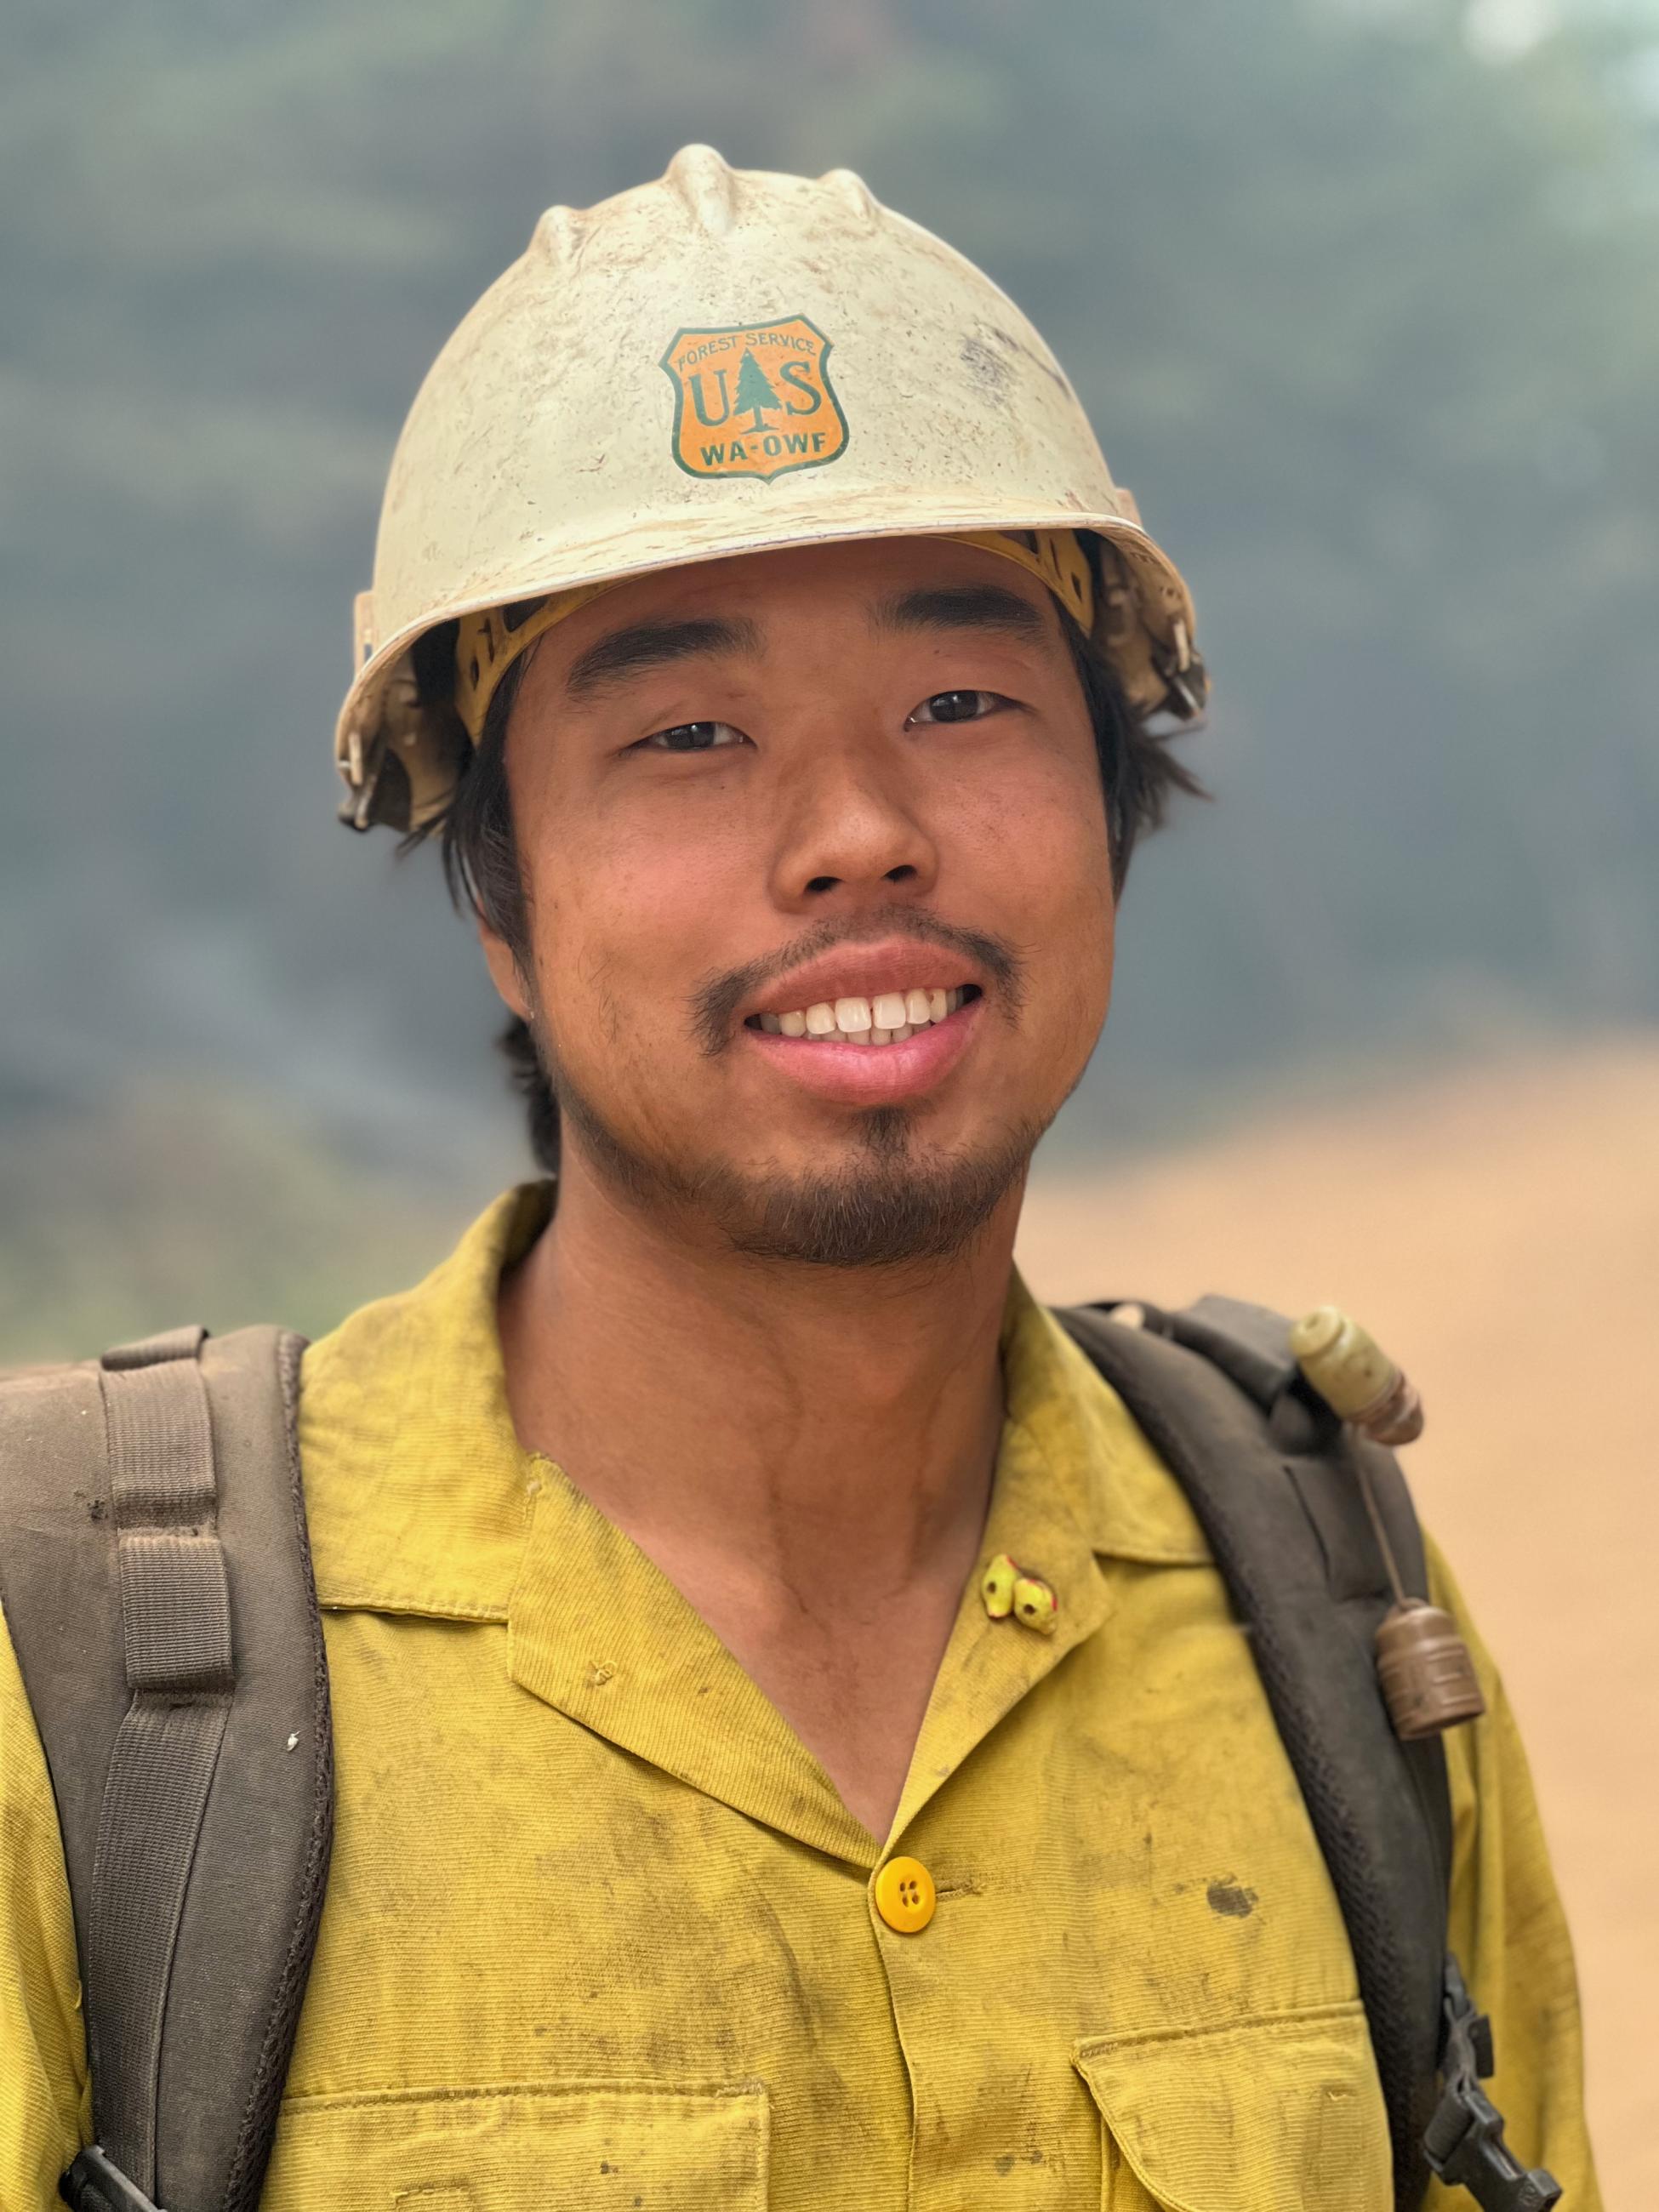 A portrait of a firefighter in yellow shirt and white helmet.